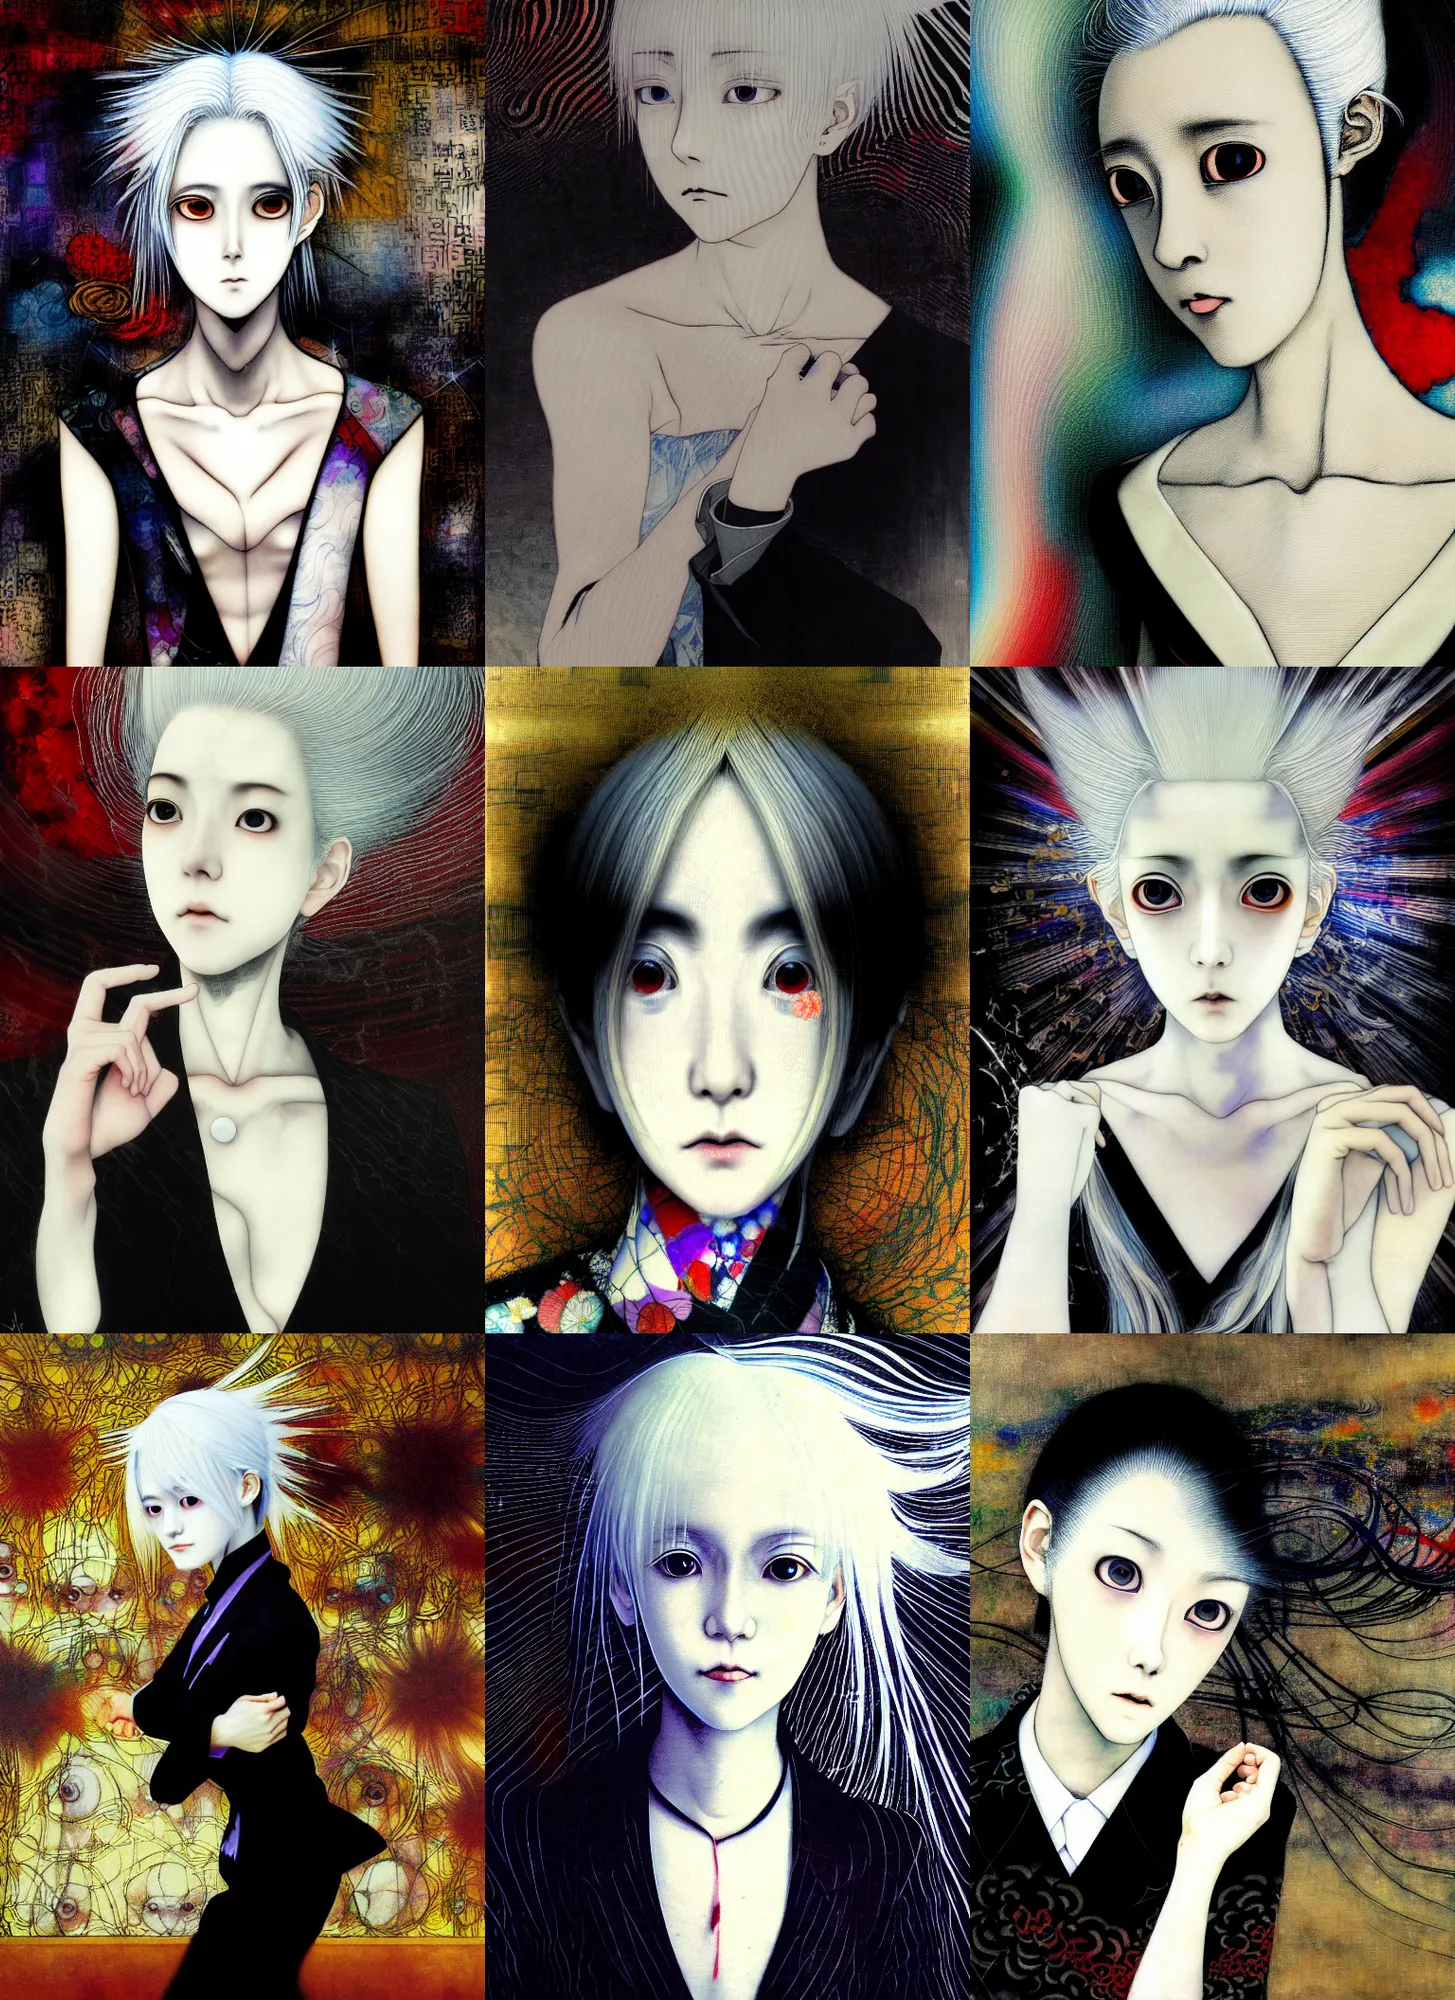 Prompt: yoshitaka amano blurred and dreamy realistic three quarter angle portrait of a young woman with white hair and black eyes wearing dress suit with tie, junji ito abstract patterns in the background, satoshi kon anime, noisy film grain effect, highly detailed, renaissance oil painting, weird portrait angle, blurred lost edges